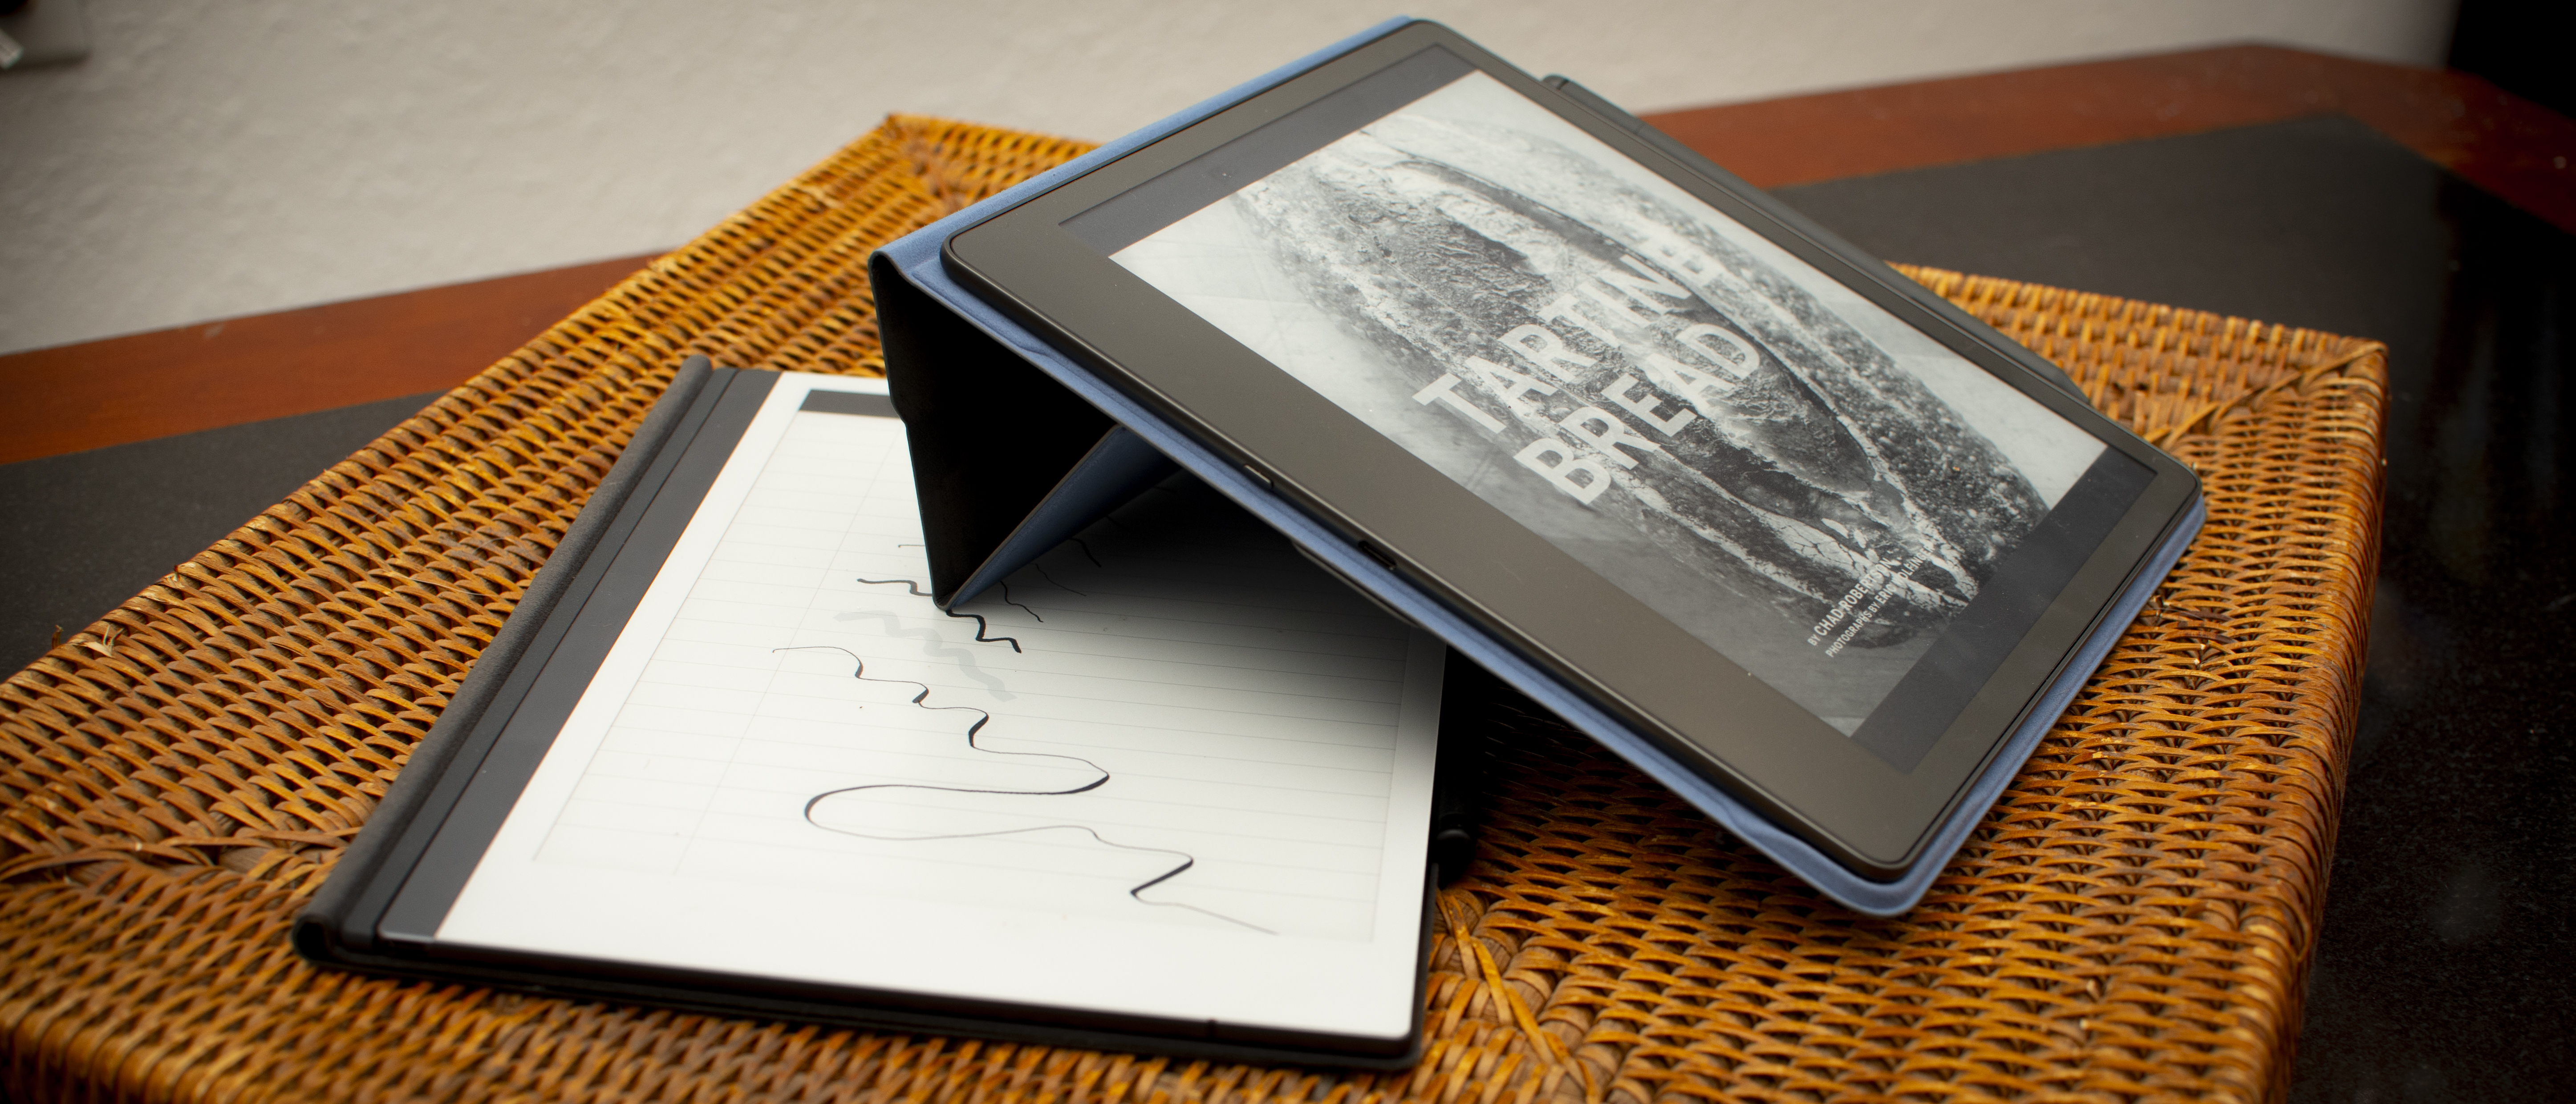 reMarkable 2 E-Ink tablet review: Superb for on-screen writing